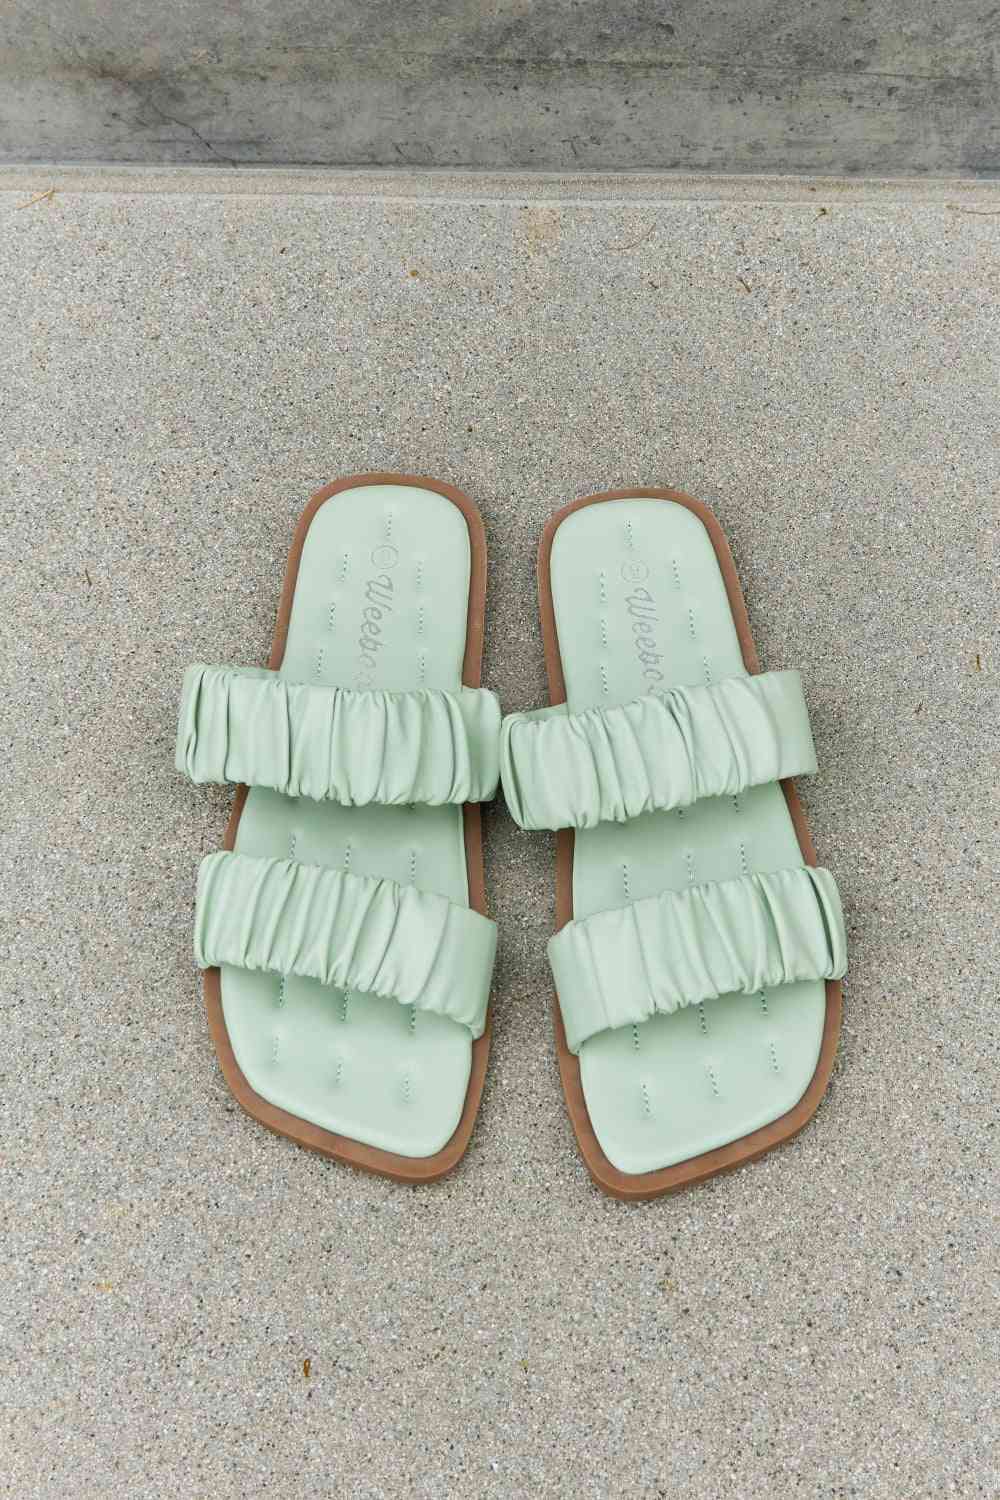 Double Strap Scrunch Sandal in Gum Leaf - Green / 6.5 - All Products - Shoes - 1 - 2024